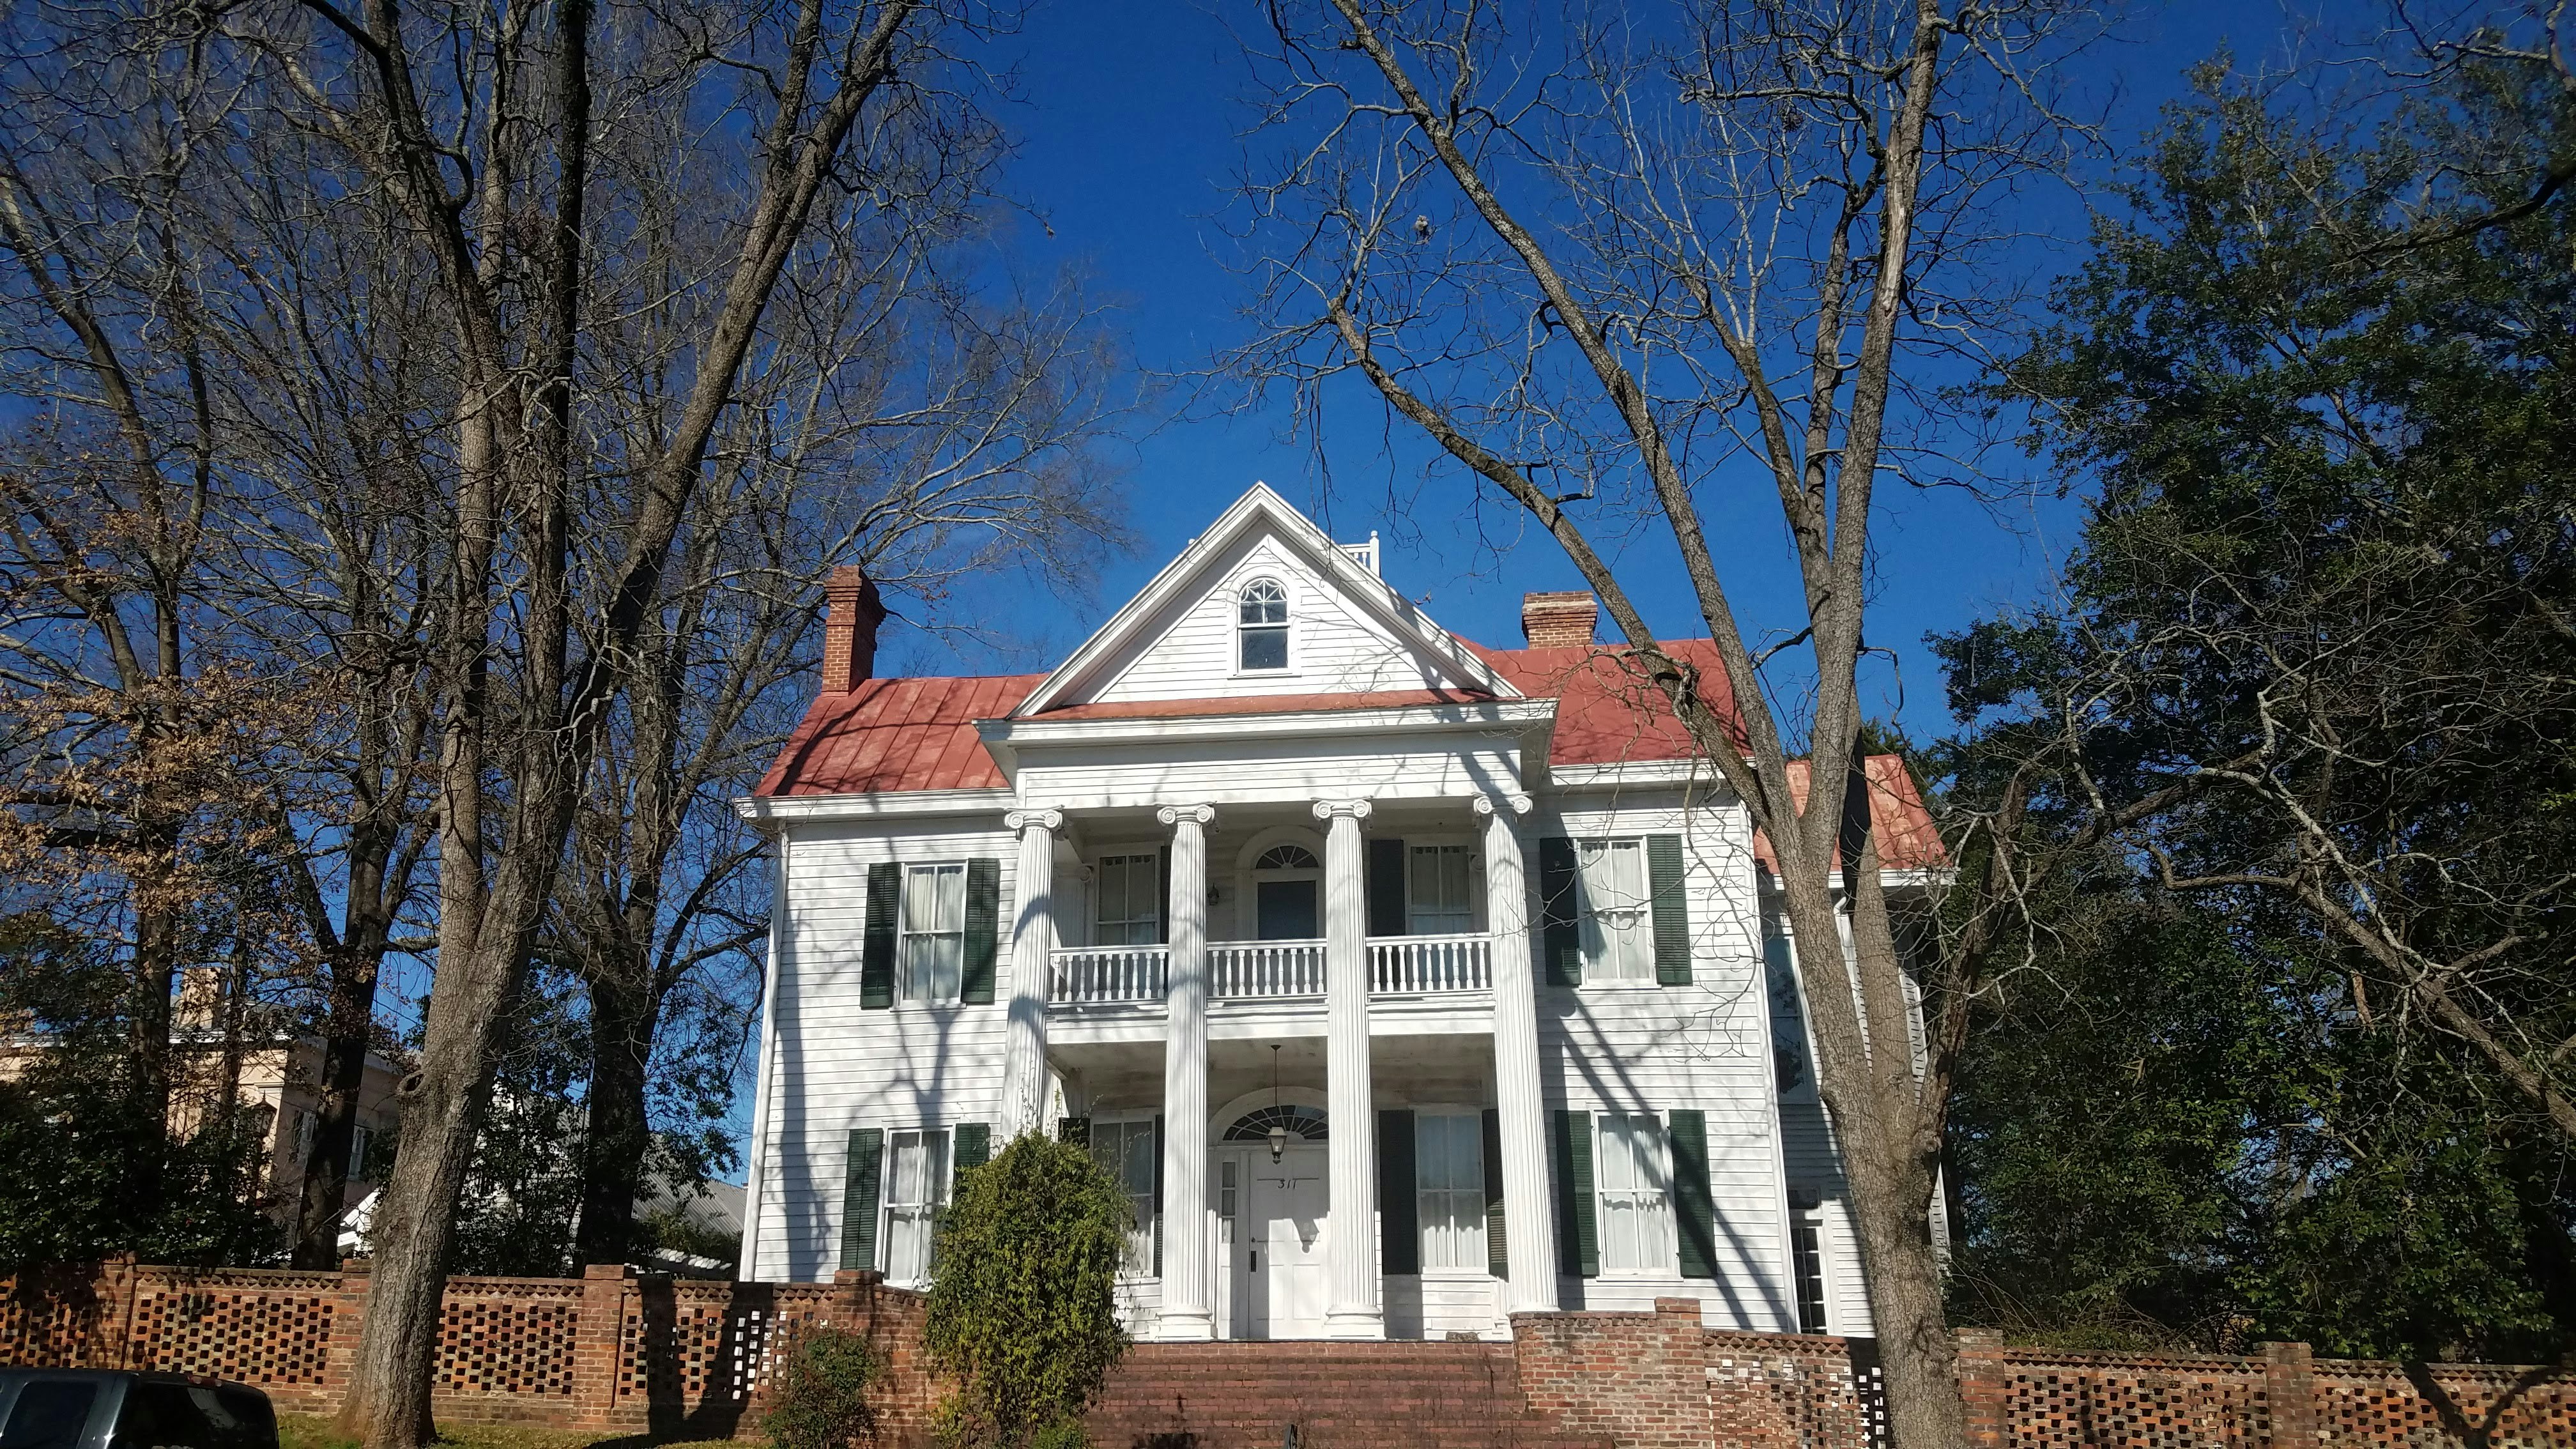 A white antebellum mansion with four Ionic white columns and symmetrical sets of windows on either side of the central porch and a red metal roof sits amidst bare trees behind a low openwork brick wall 